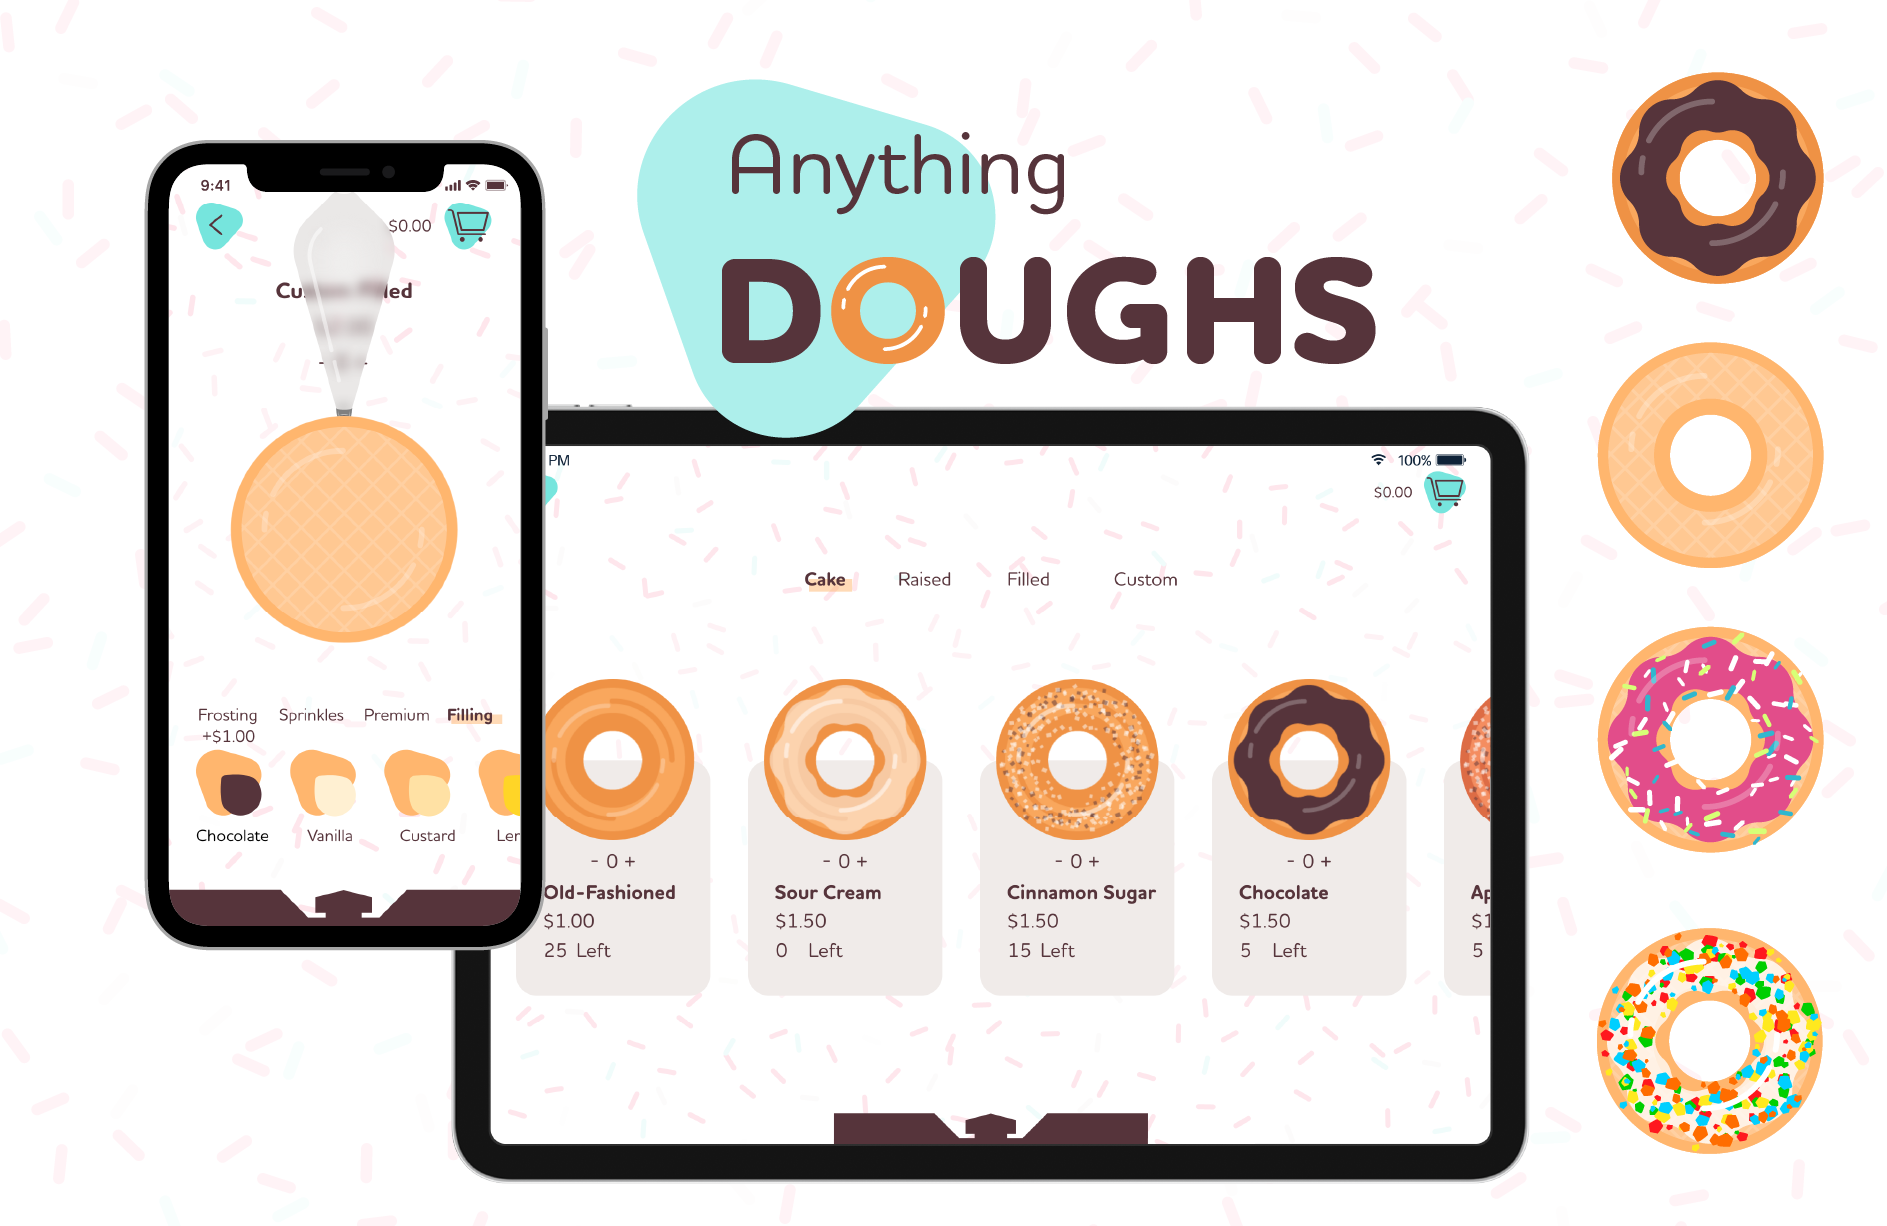 Anything Doughs. Adobe Live. October 2019